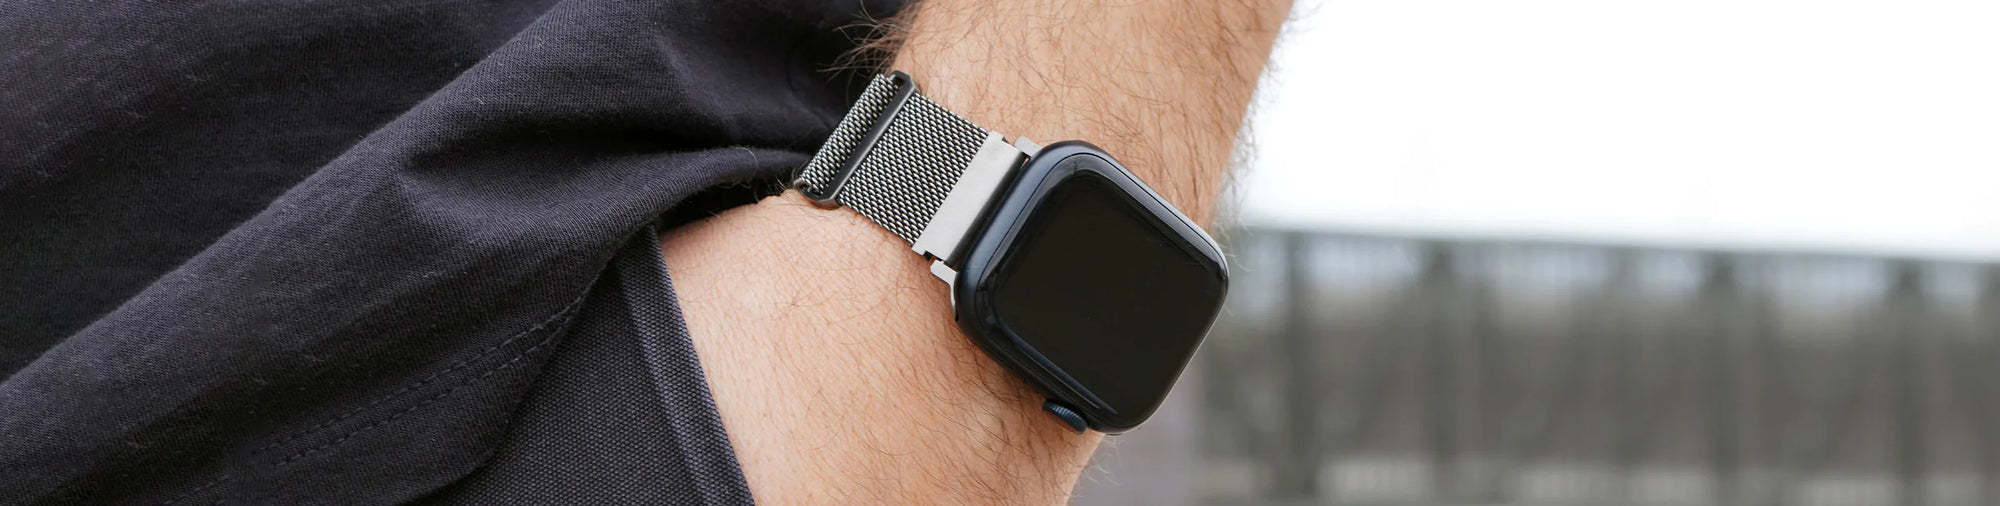 Magnetic Bands for Apple Watch